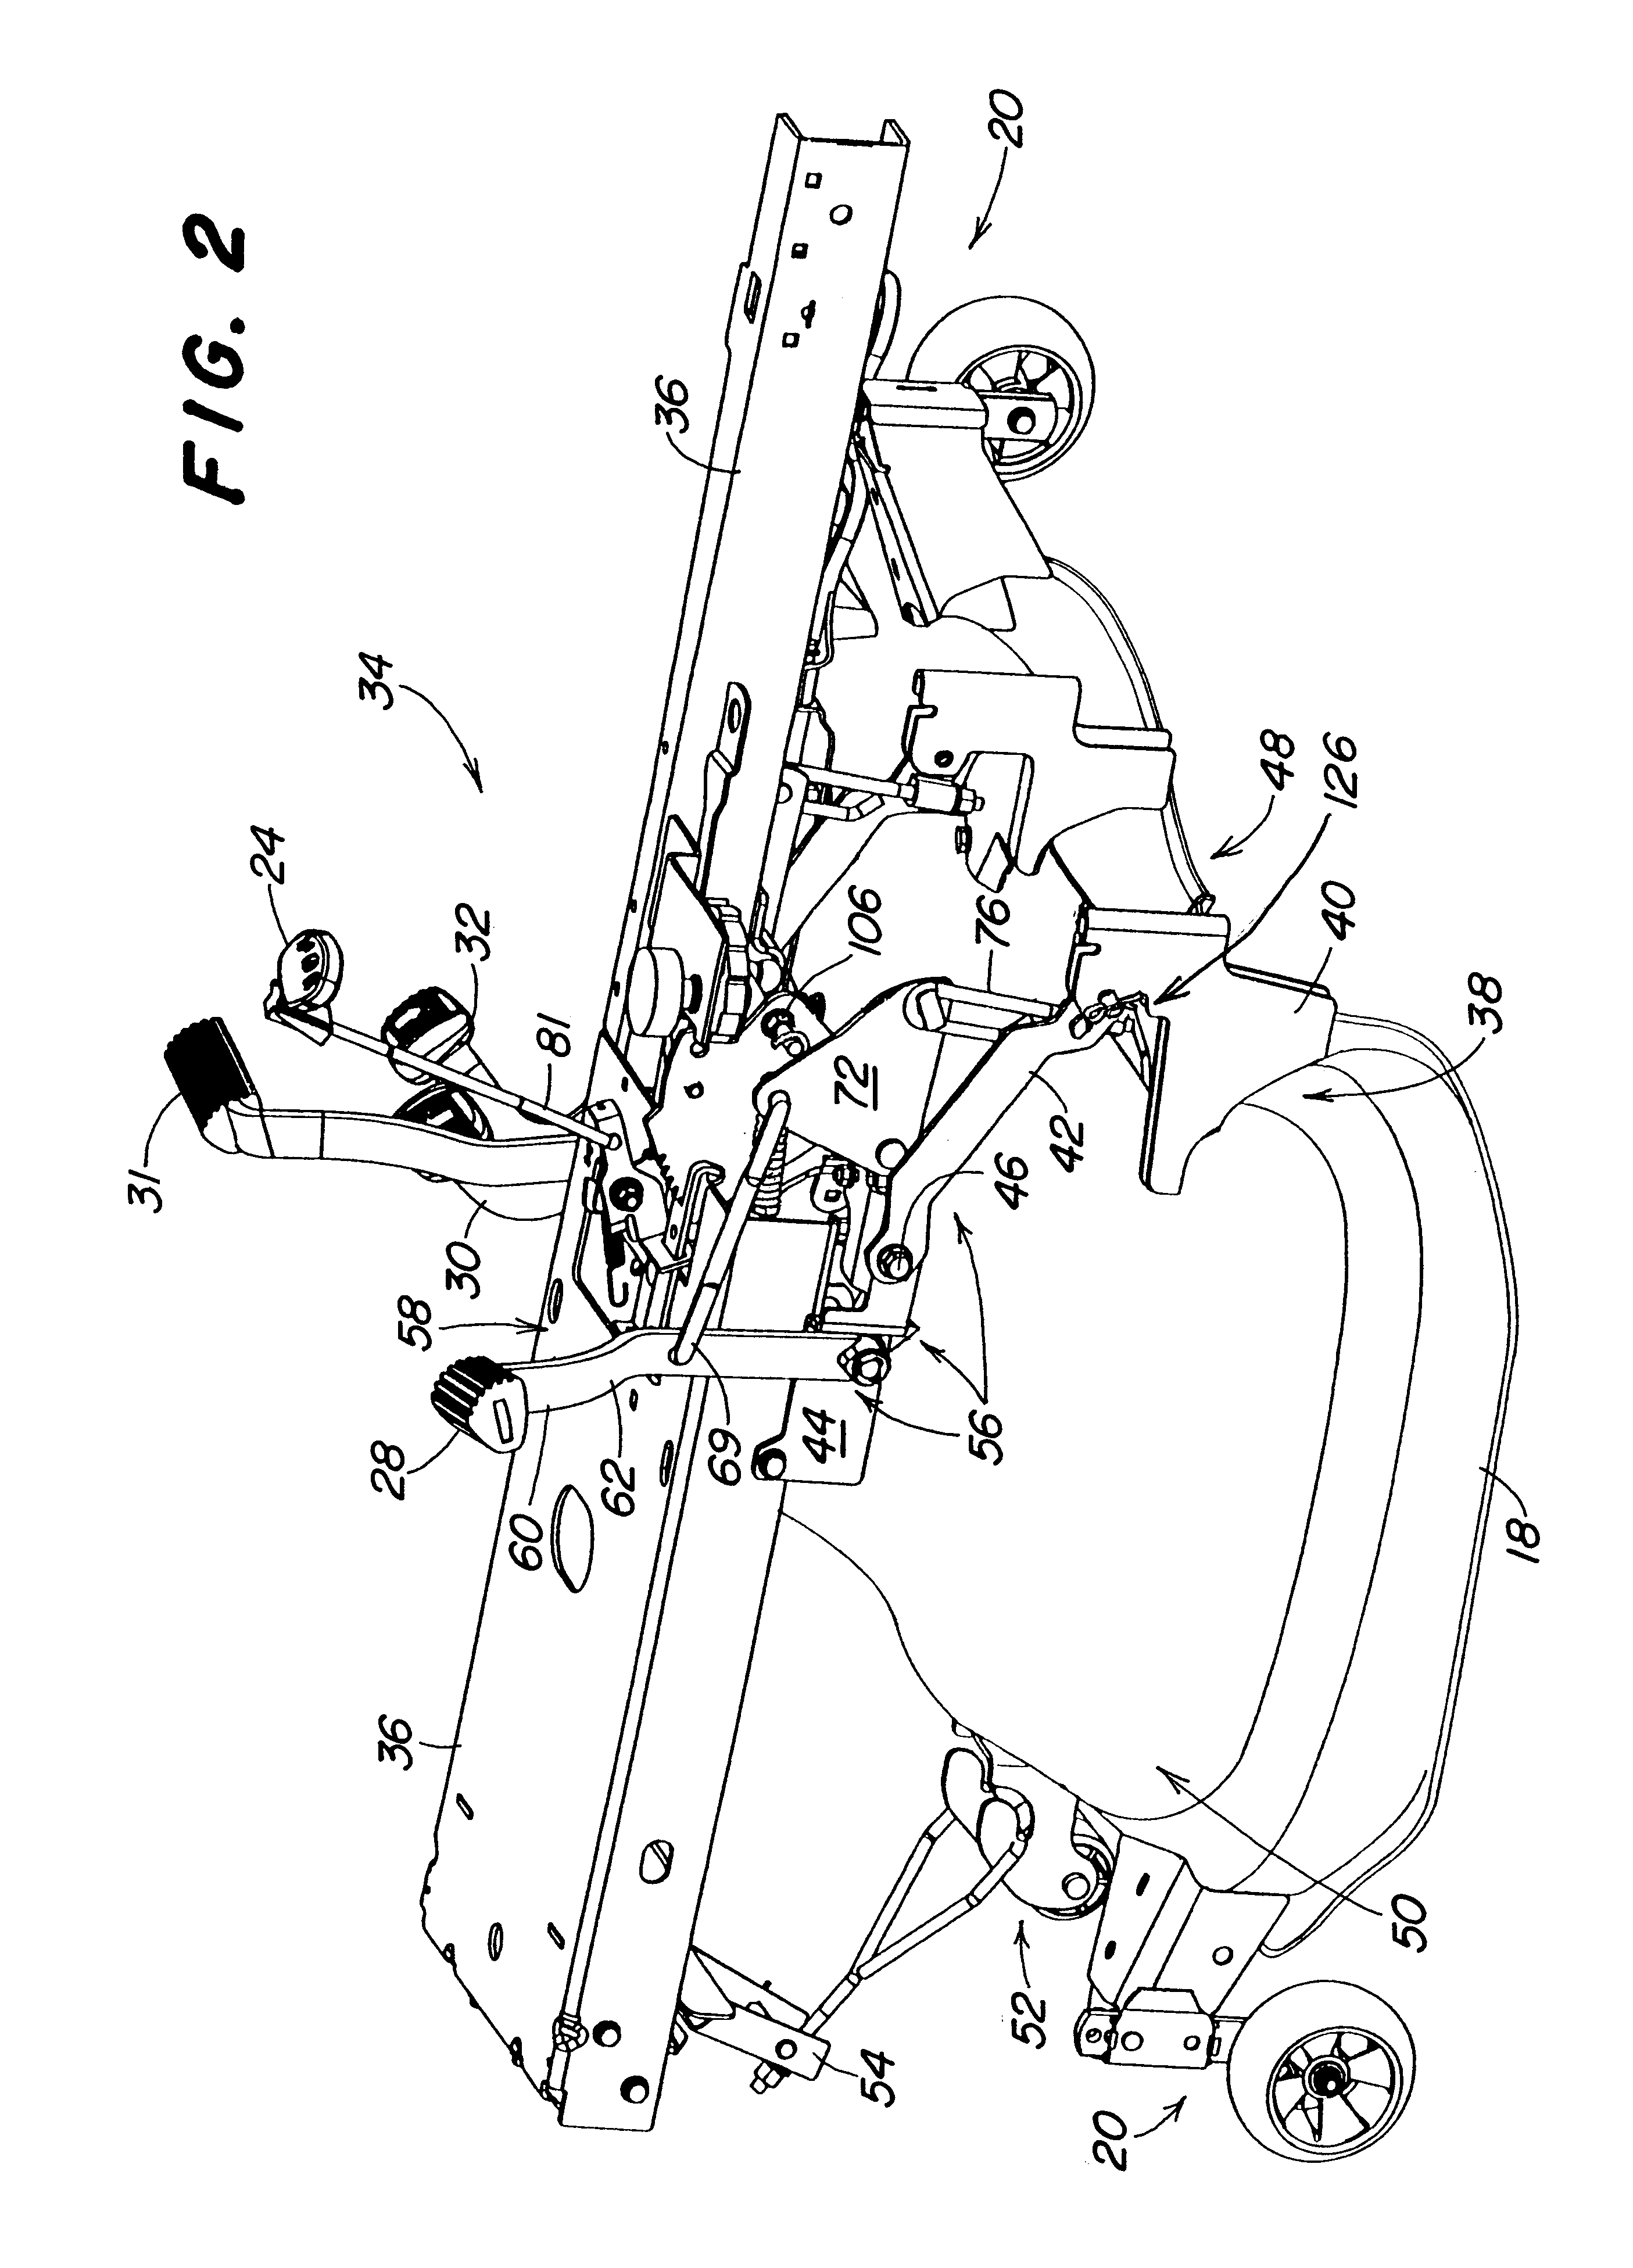 Pedal actuated height adjustment mechanism for a mower cutting deck